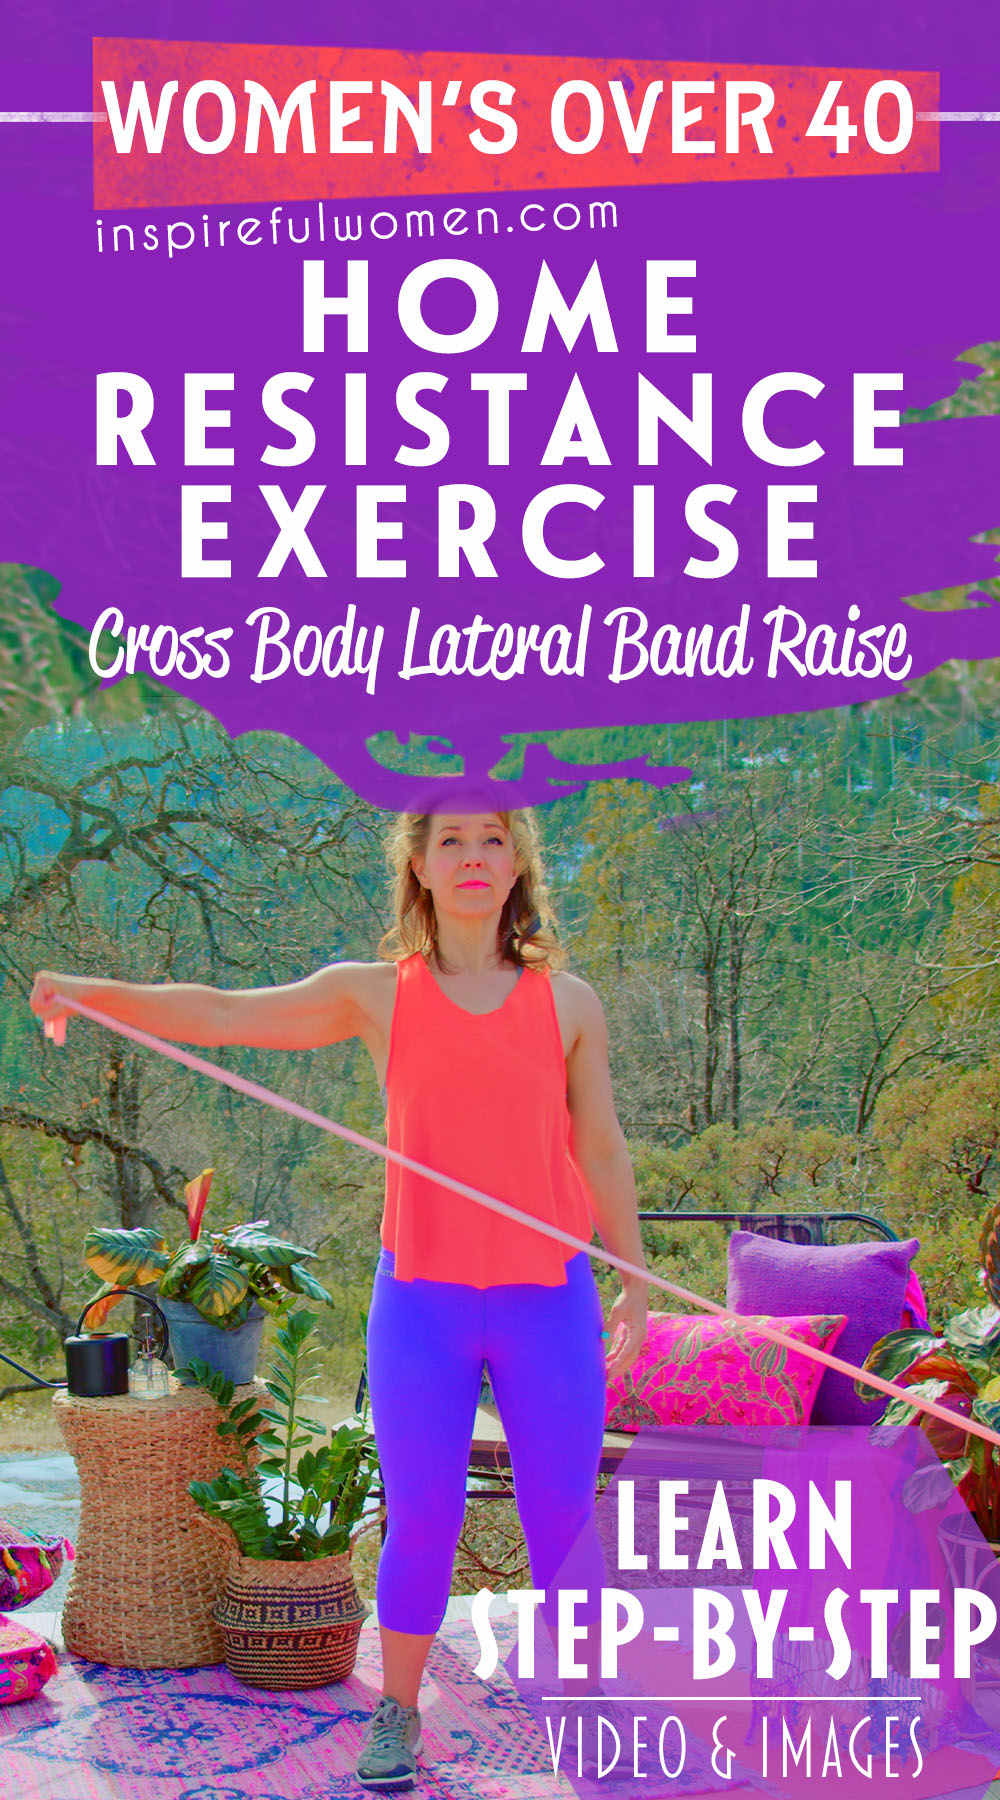 cross-body-lateral-band-raise-home-resistance-training-shoulder-exercise-women-40+